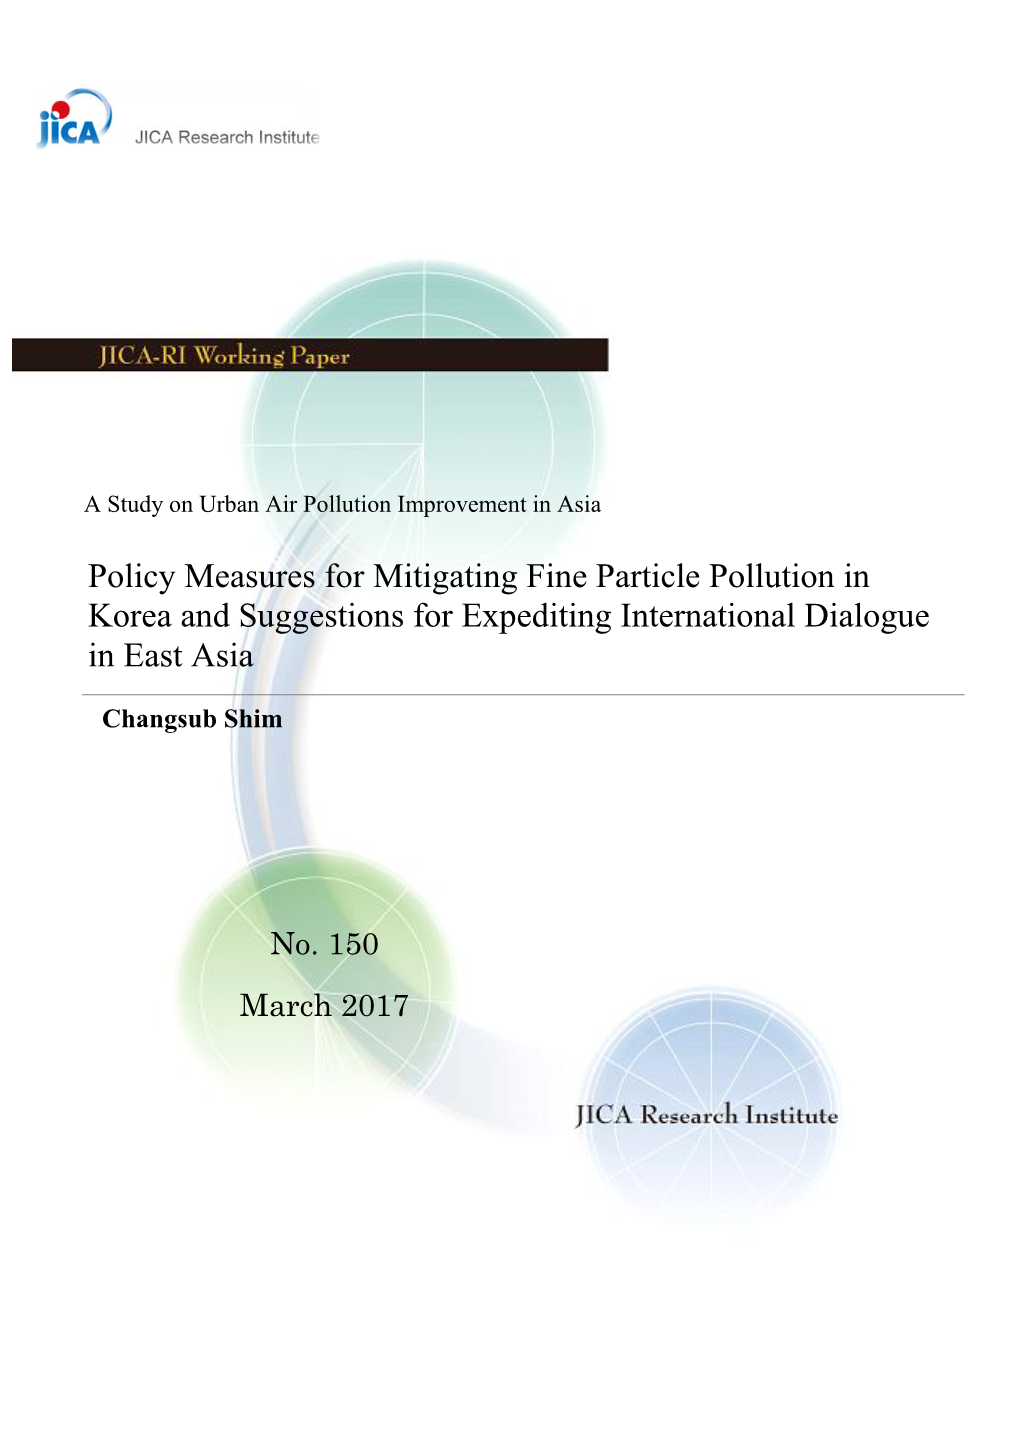 Policy Measures for Mitigating Fine Particle Pollution in Korea and Suggestions for Expediting International Dialogue in East Asia